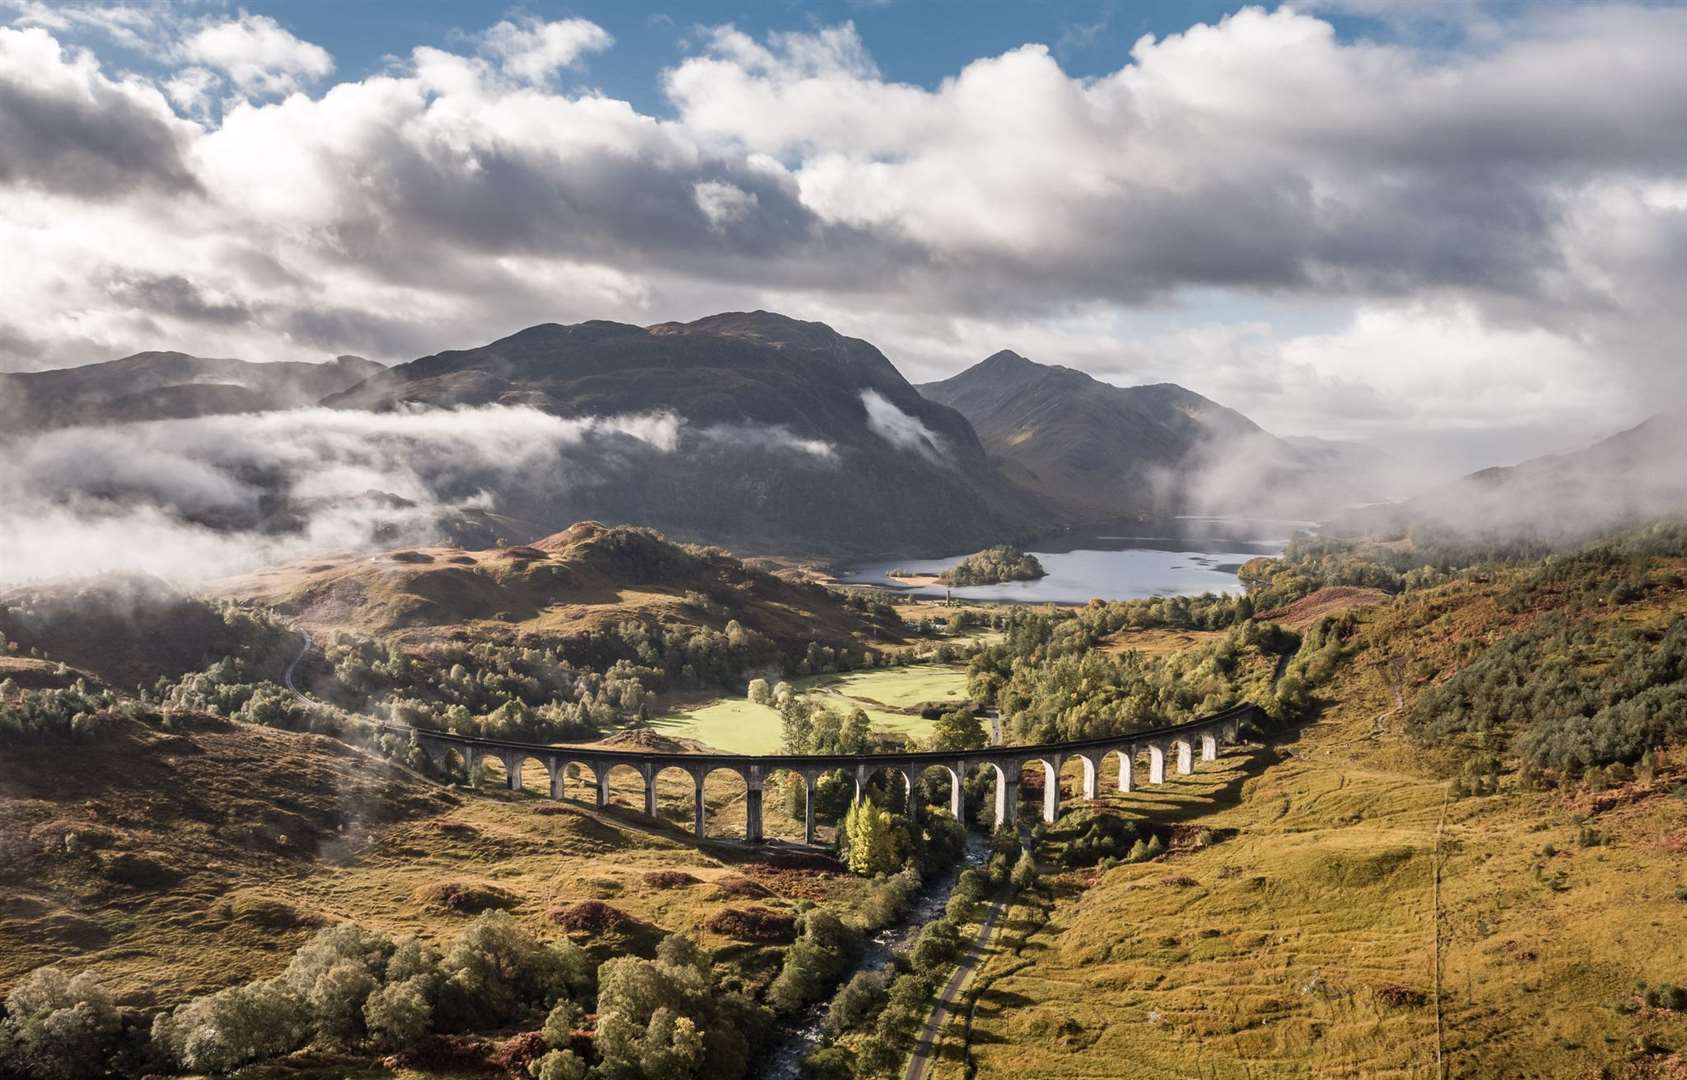 The iconic Glenfinnan Viaduct on the West Highland Line, made famous as part ofroute undertaken by the Hogwarts Express in the Harry Potter films.